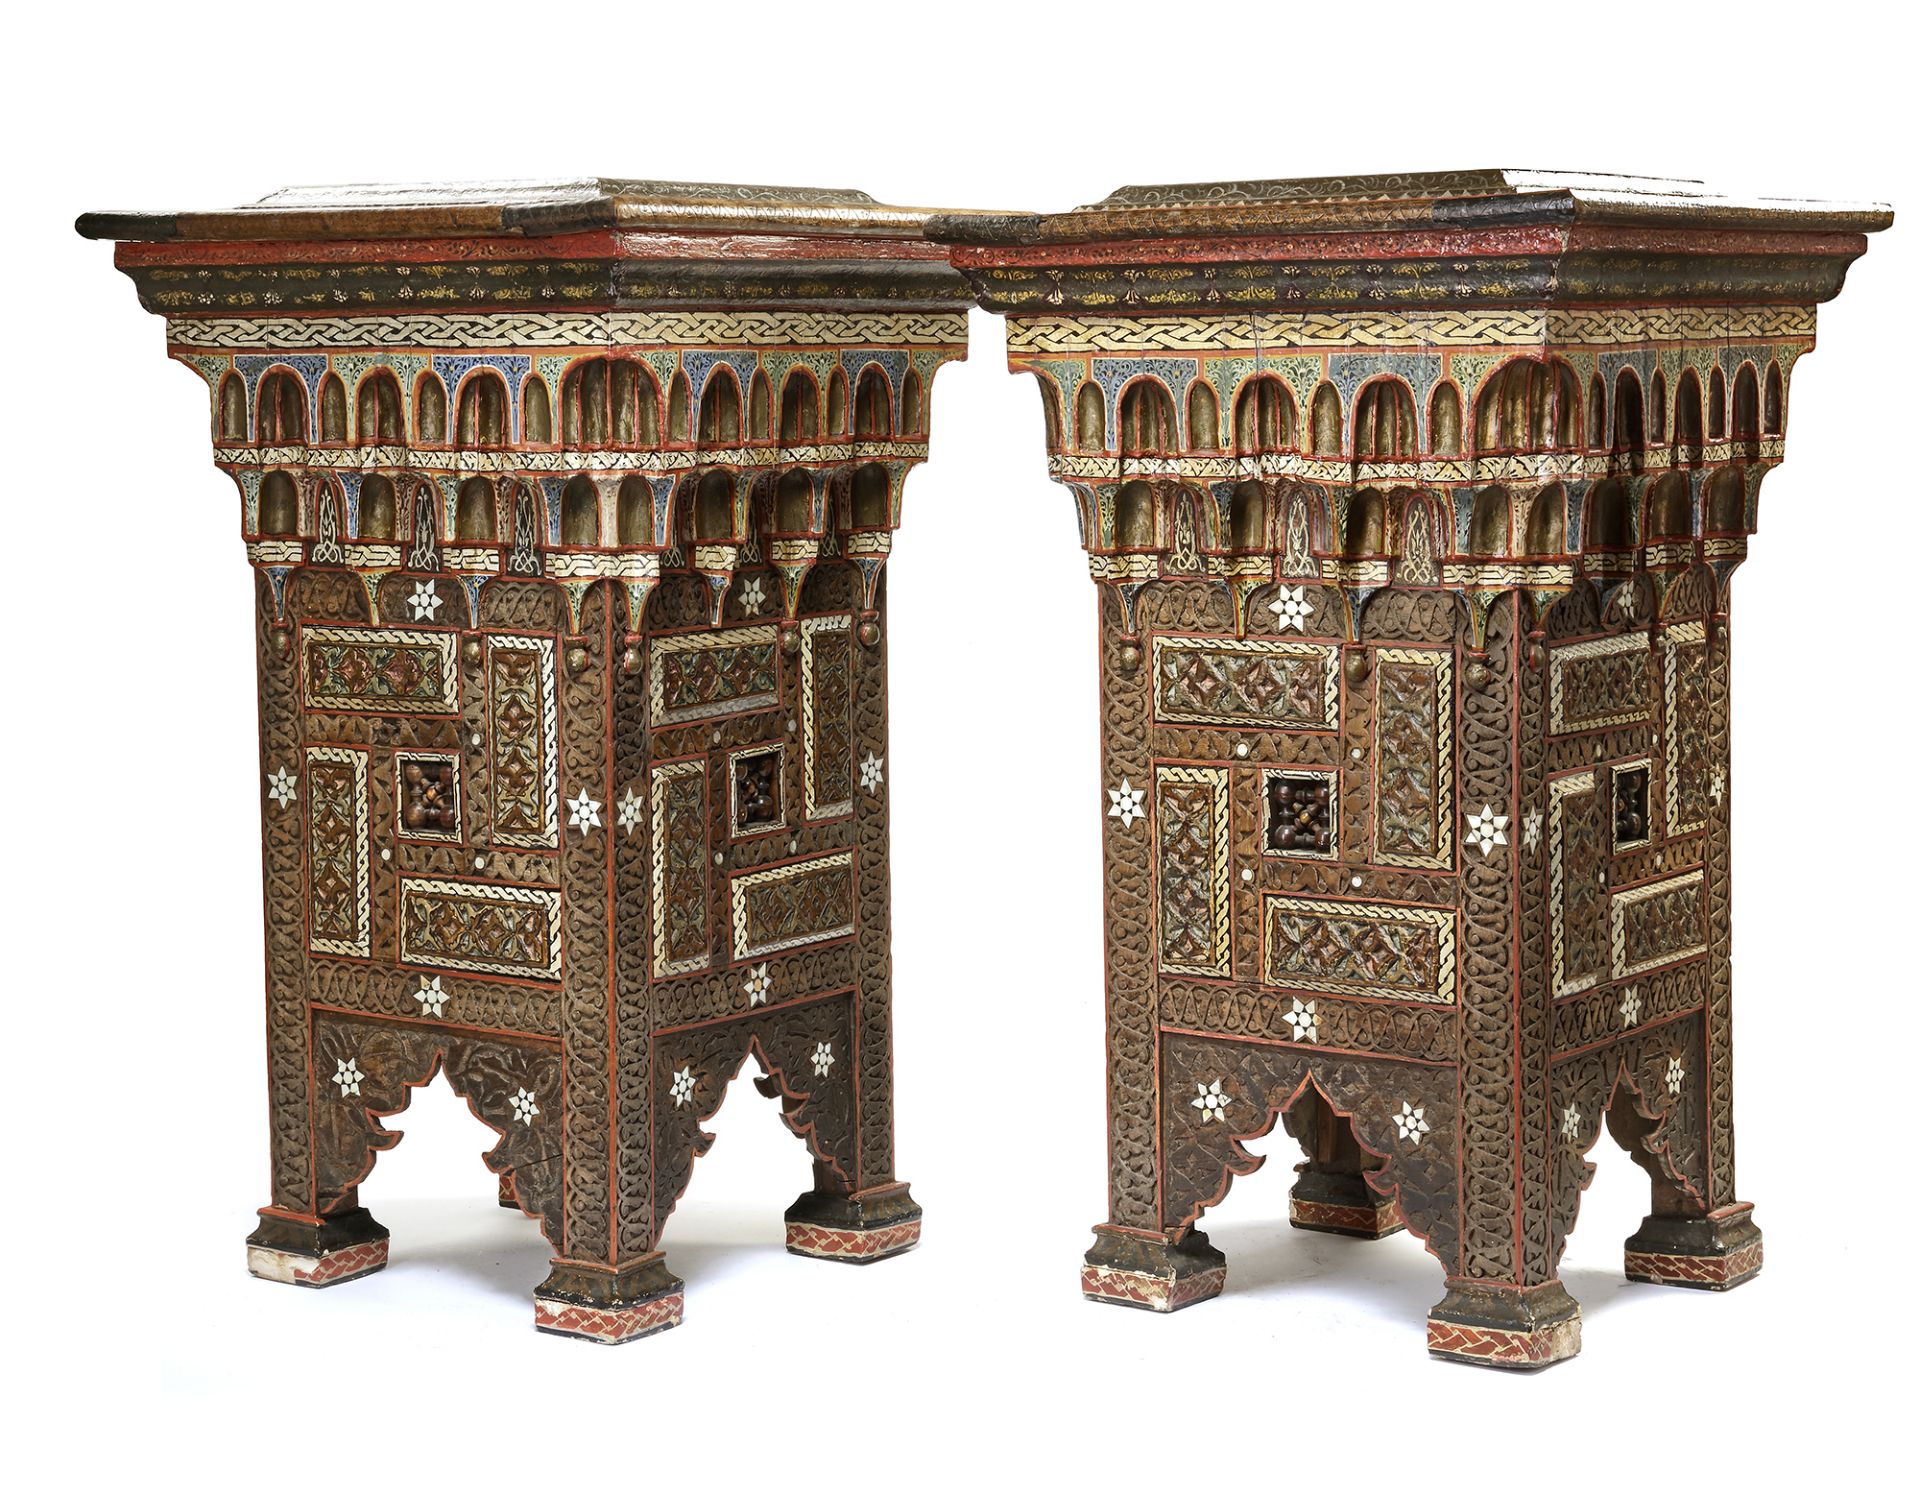 A PAIR OF DAMASCUS BONE-INLAID PAINTED WOOD PLANT STANDS INLAID WITH DAMASCUS POTTERY TILES, SYRIA, - Image 2 of 10